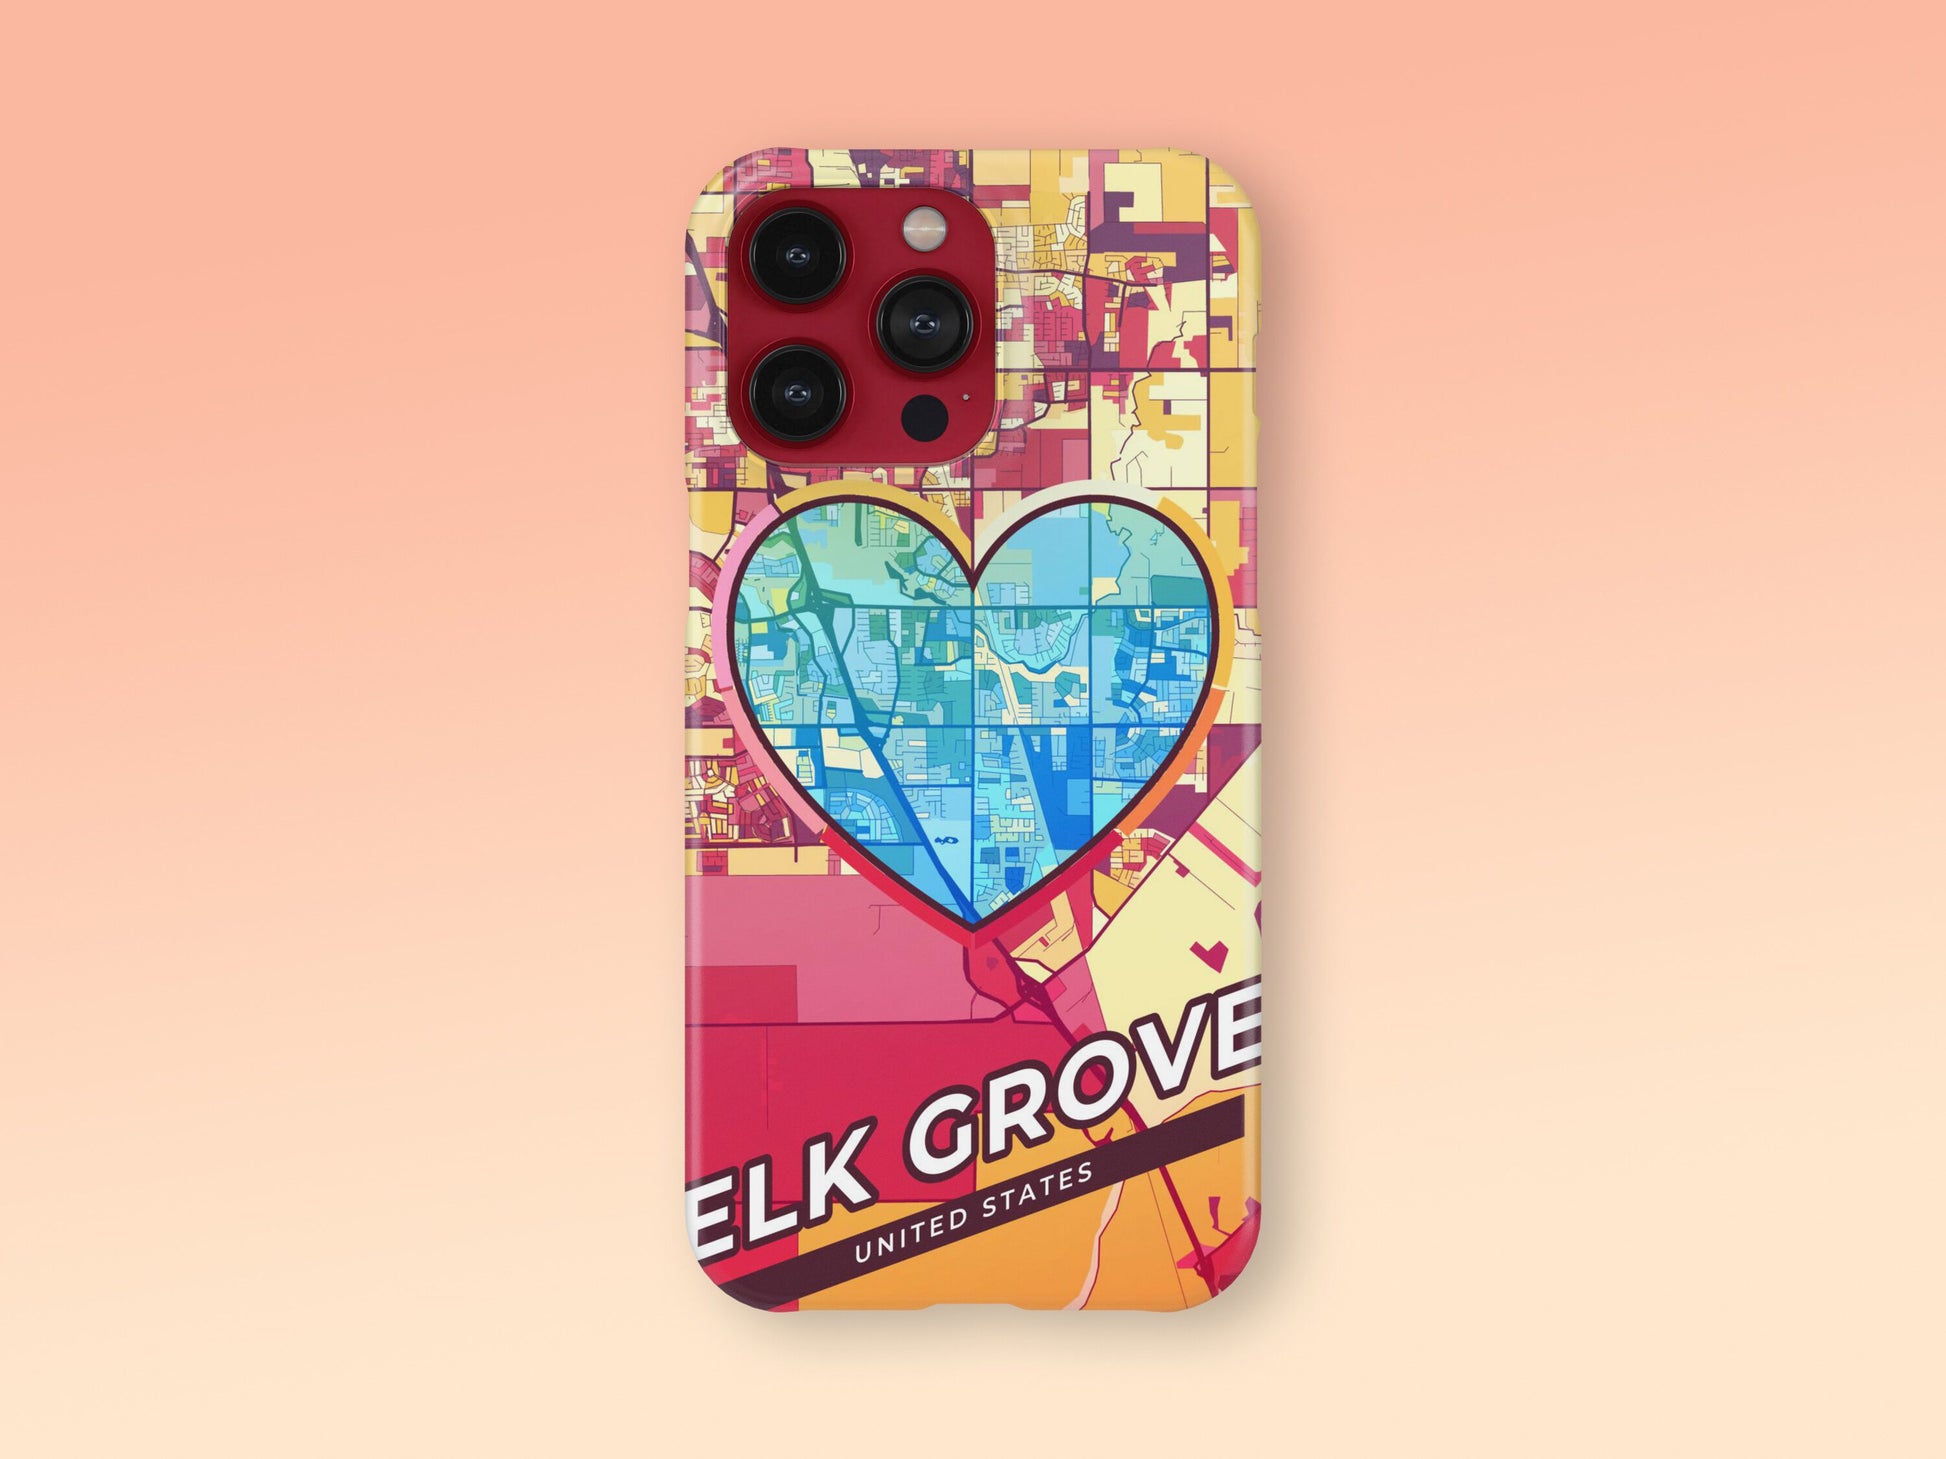 Elk Grove California slim phone case with colorful icon. Birthday, wedding or housewarming gift. Couple match cases. 2